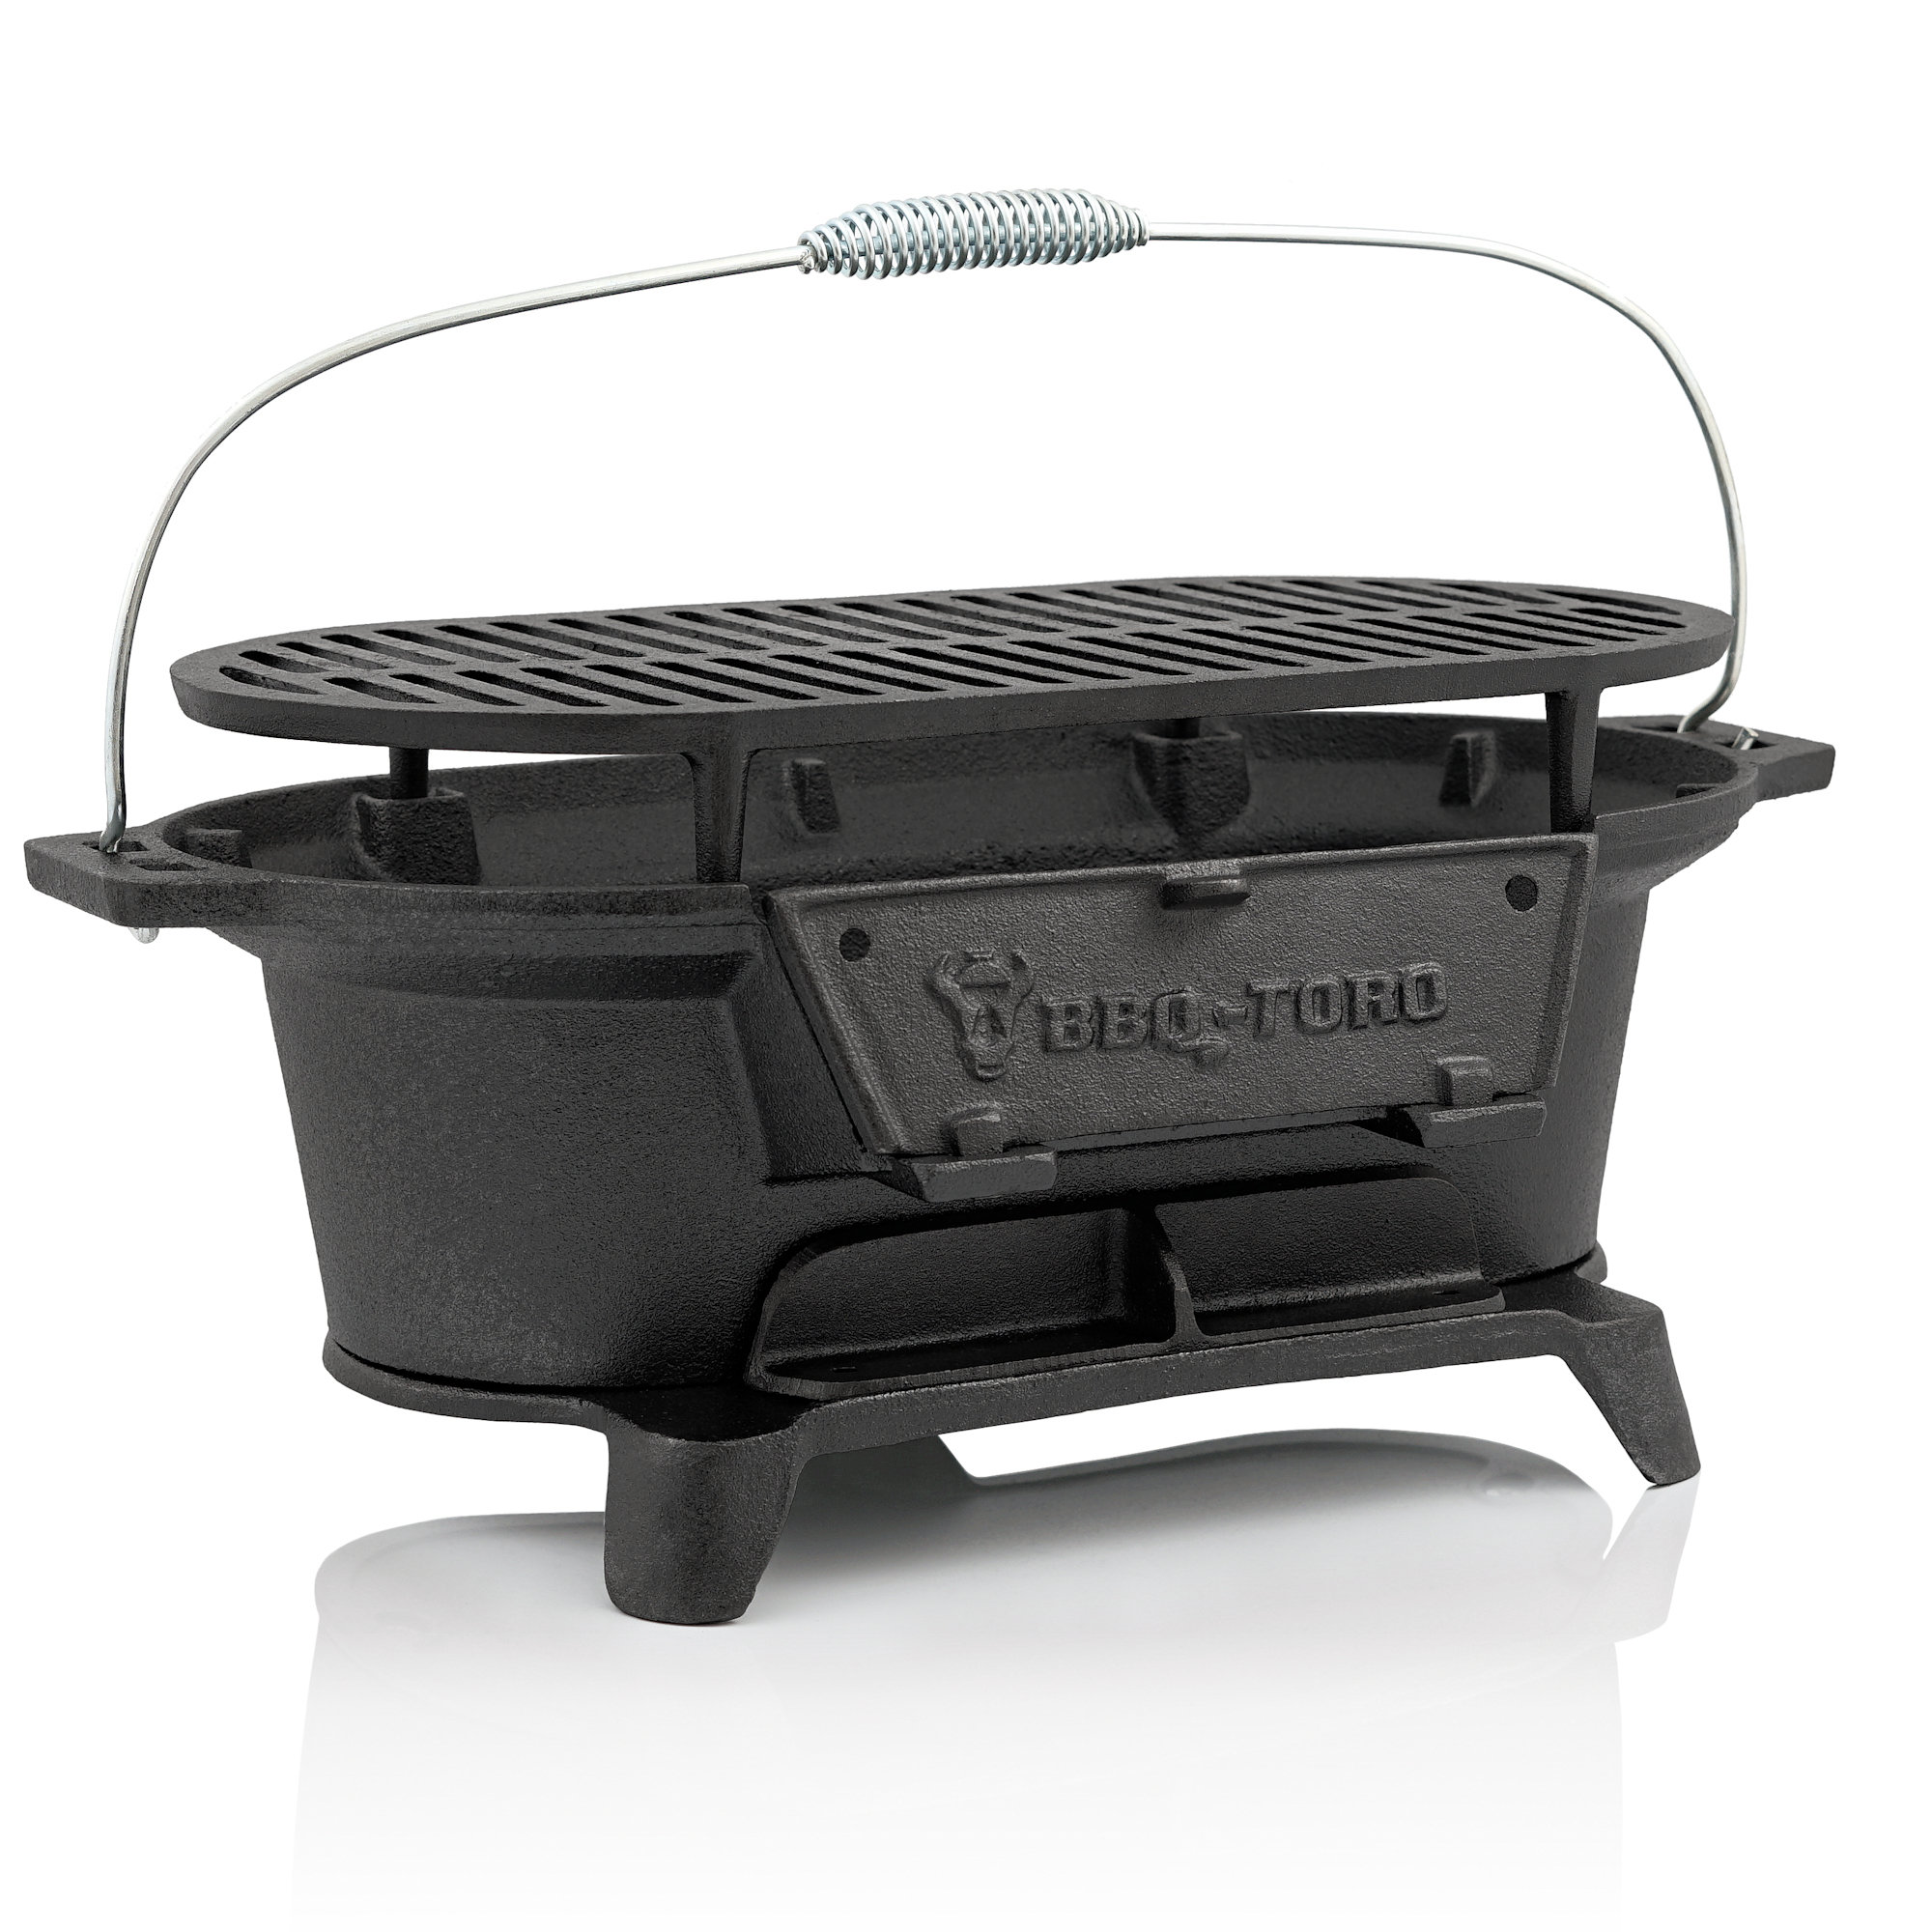 BBQ-Toro Gusseisen Grilltopf mit Grillrost Hibachi Style Holzkohle  Campinggrill 4260532290676